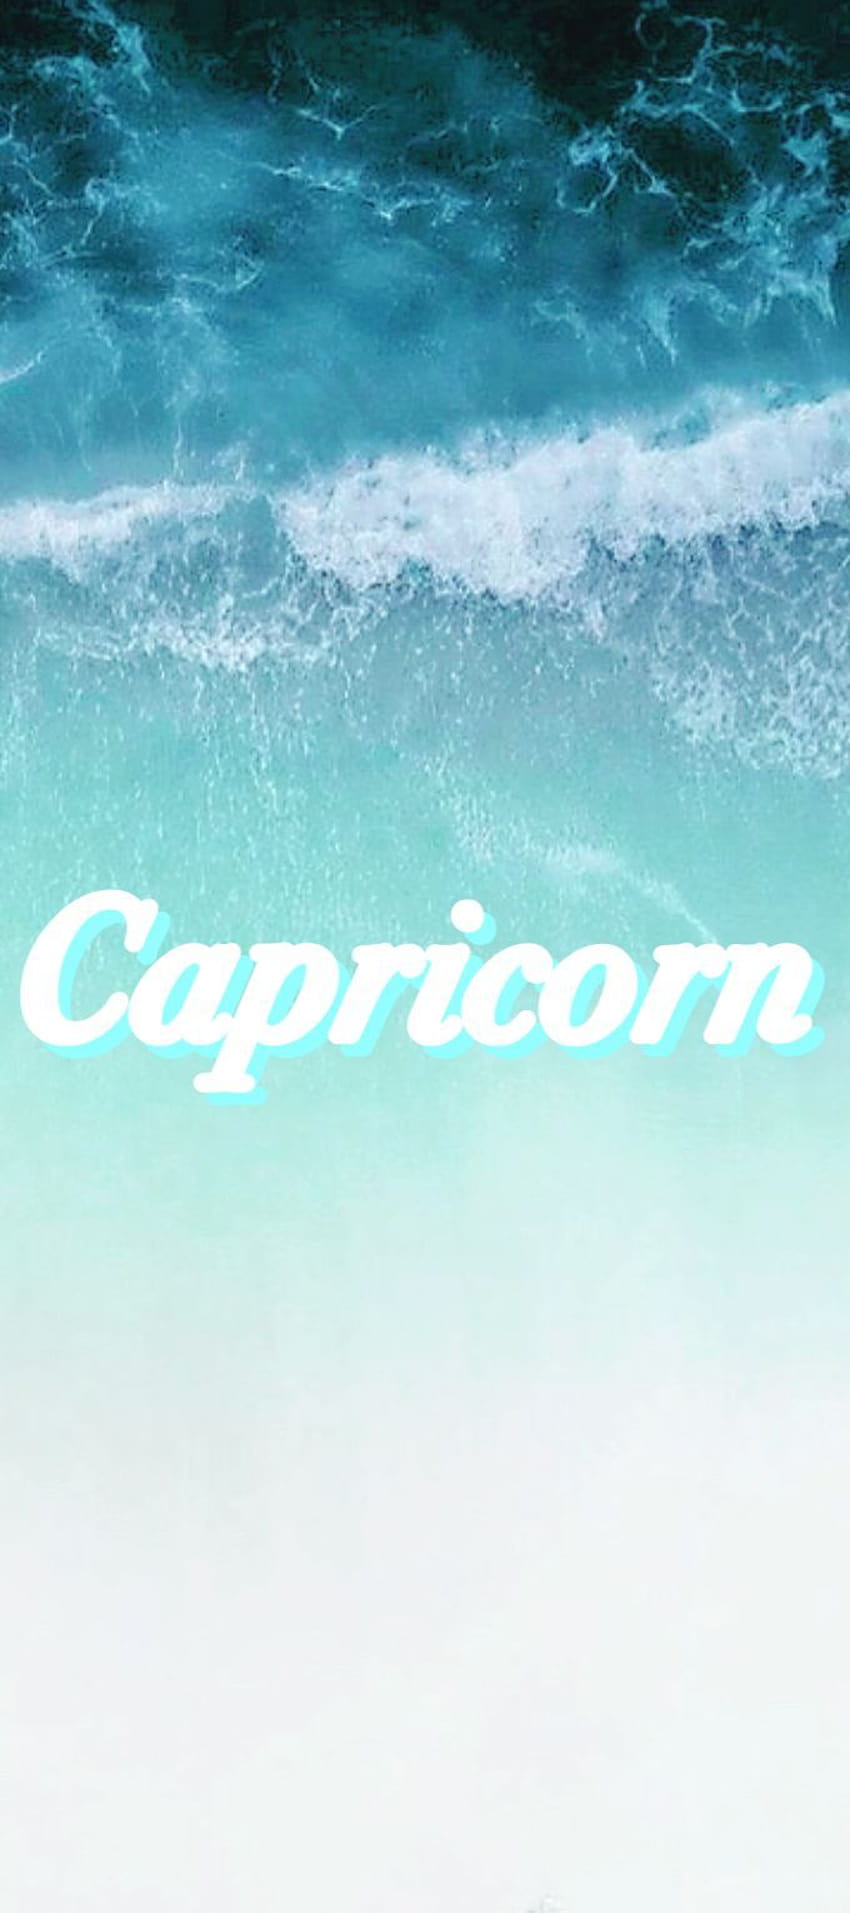 Capricorn wallpaper by me! Use in your phone or desktop background. - Capricorn